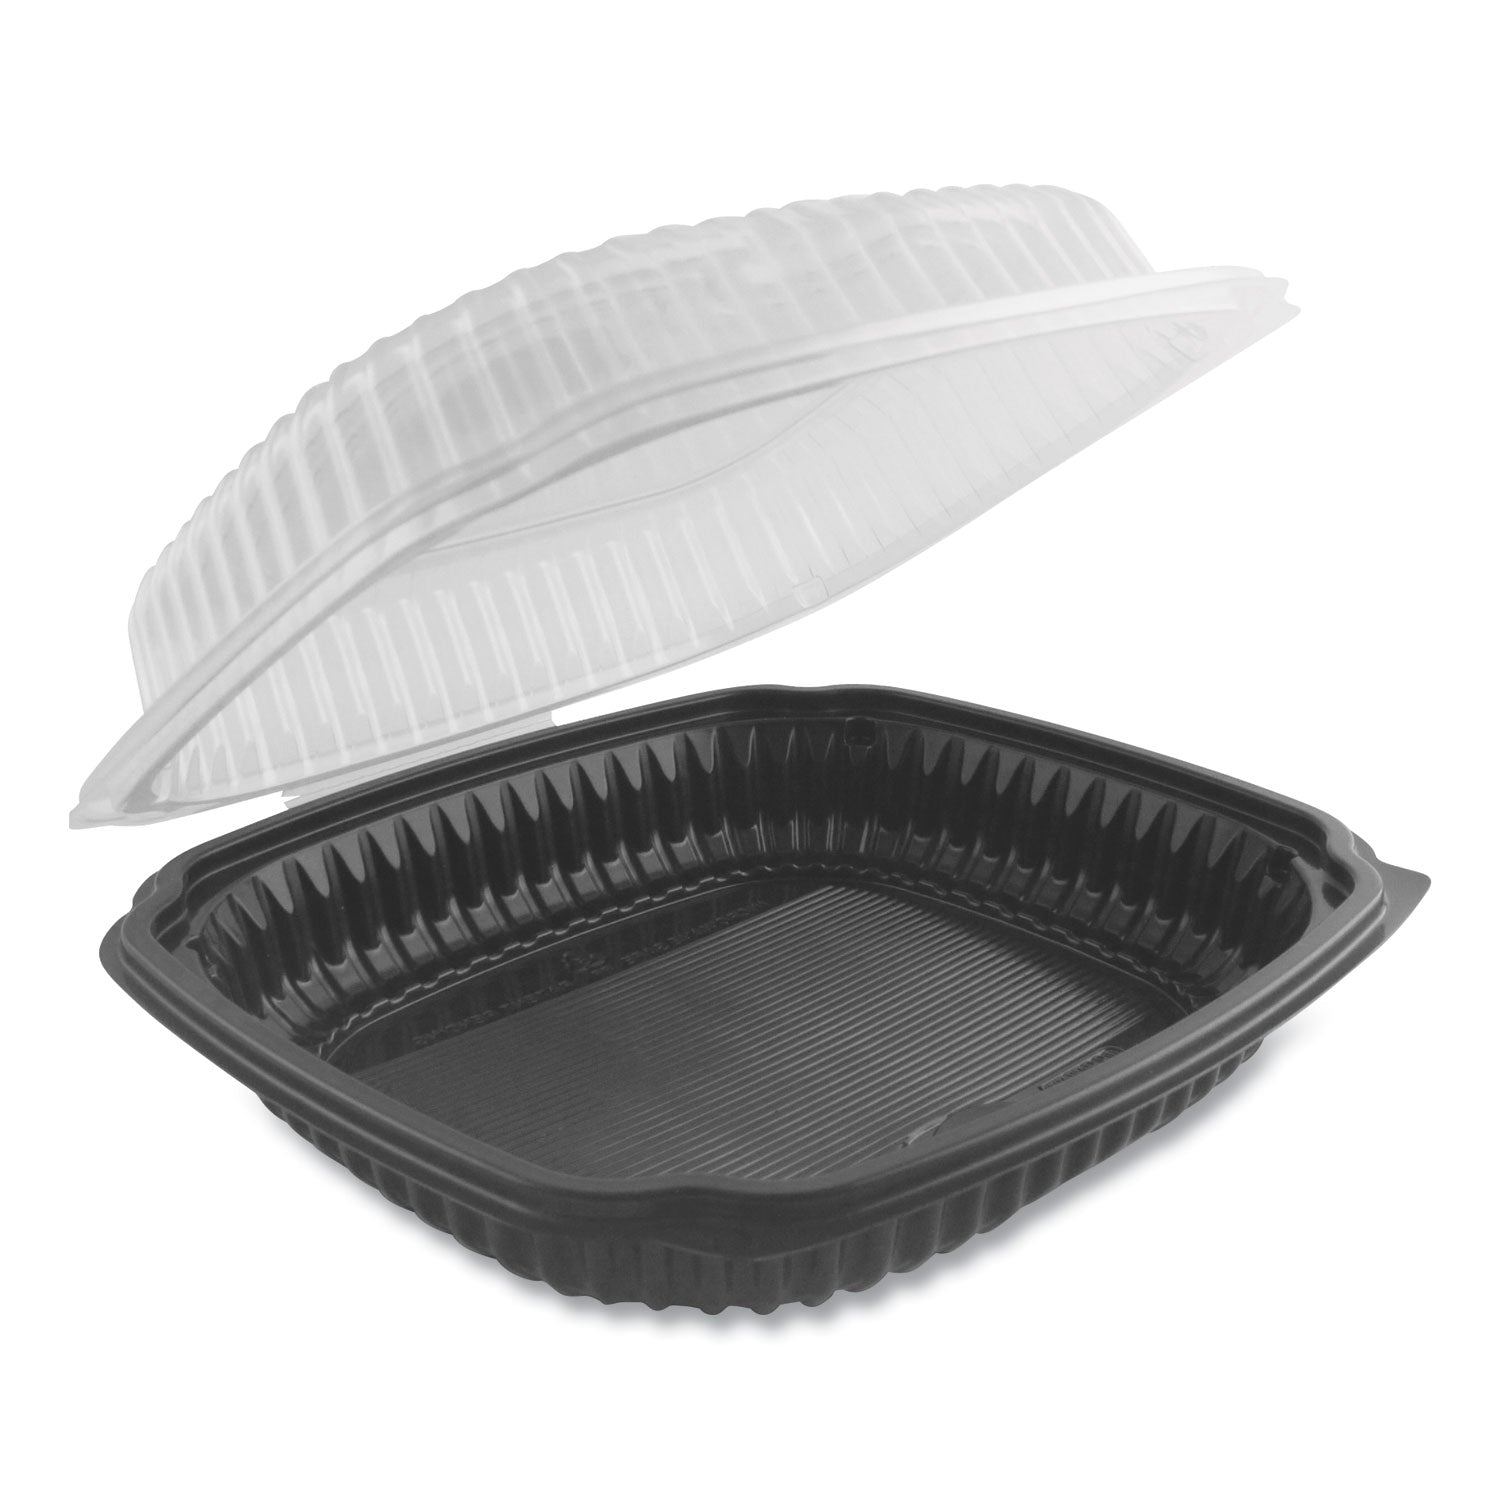 culinary-lites-microwavable-container-39-oz-9-x-9-x-301-clear-black-plastic-100-carton_anz4699911 - 1